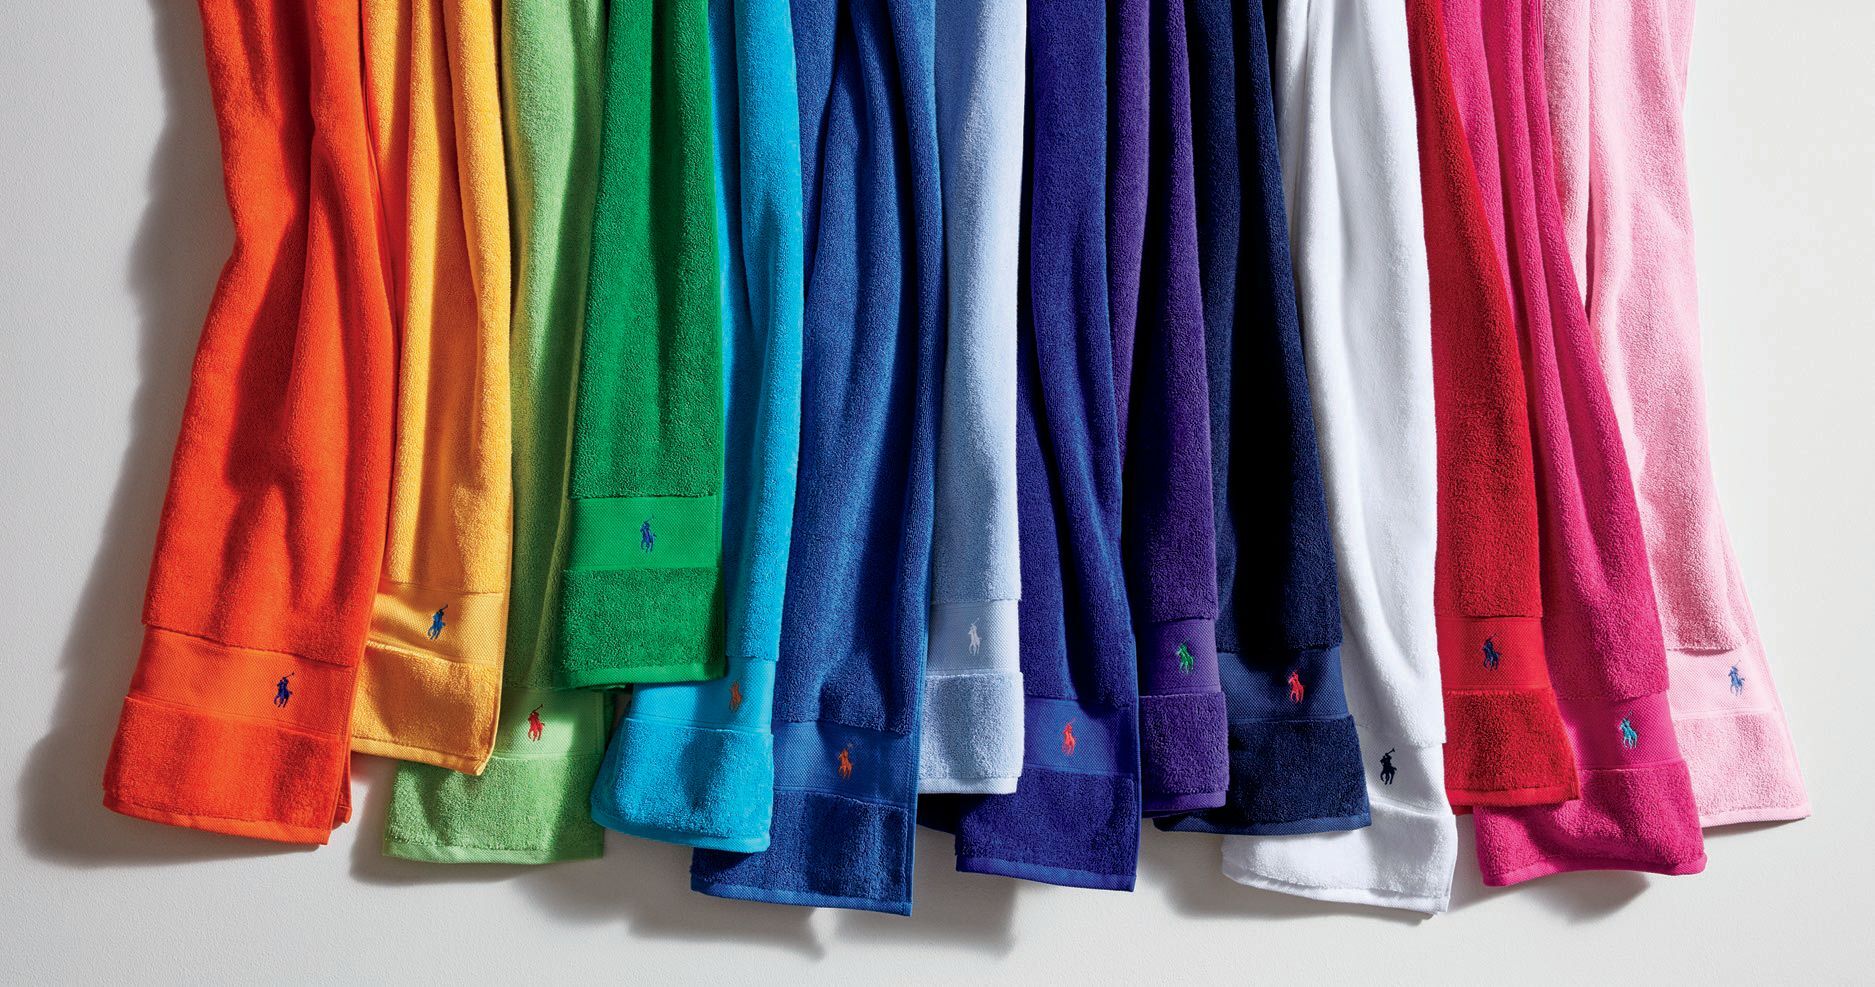 The Ralph Lauren Polo Towel Collection is available in 24 hues, embroidered with the signature Polo Pony. PHOTO COURTESY OF BRAND